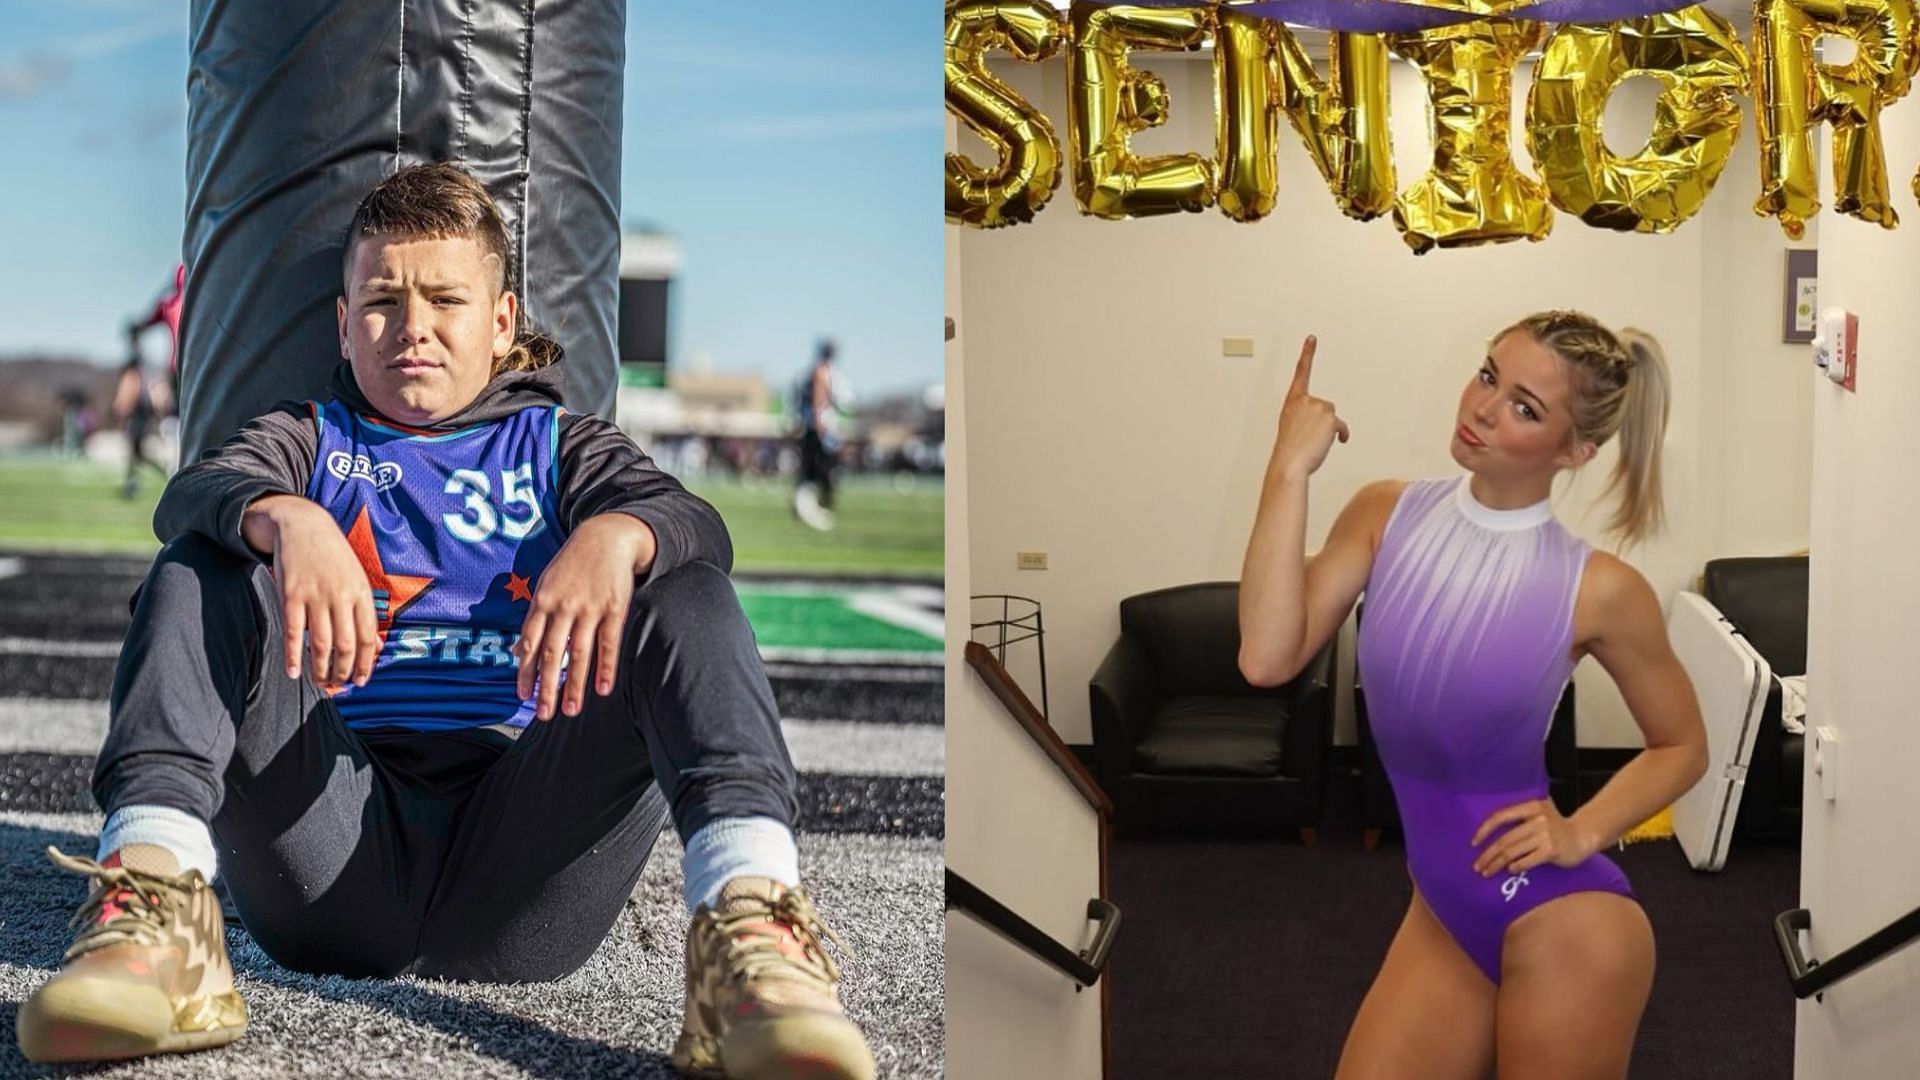 Baby Gronk and gymnast Olivia Dunne